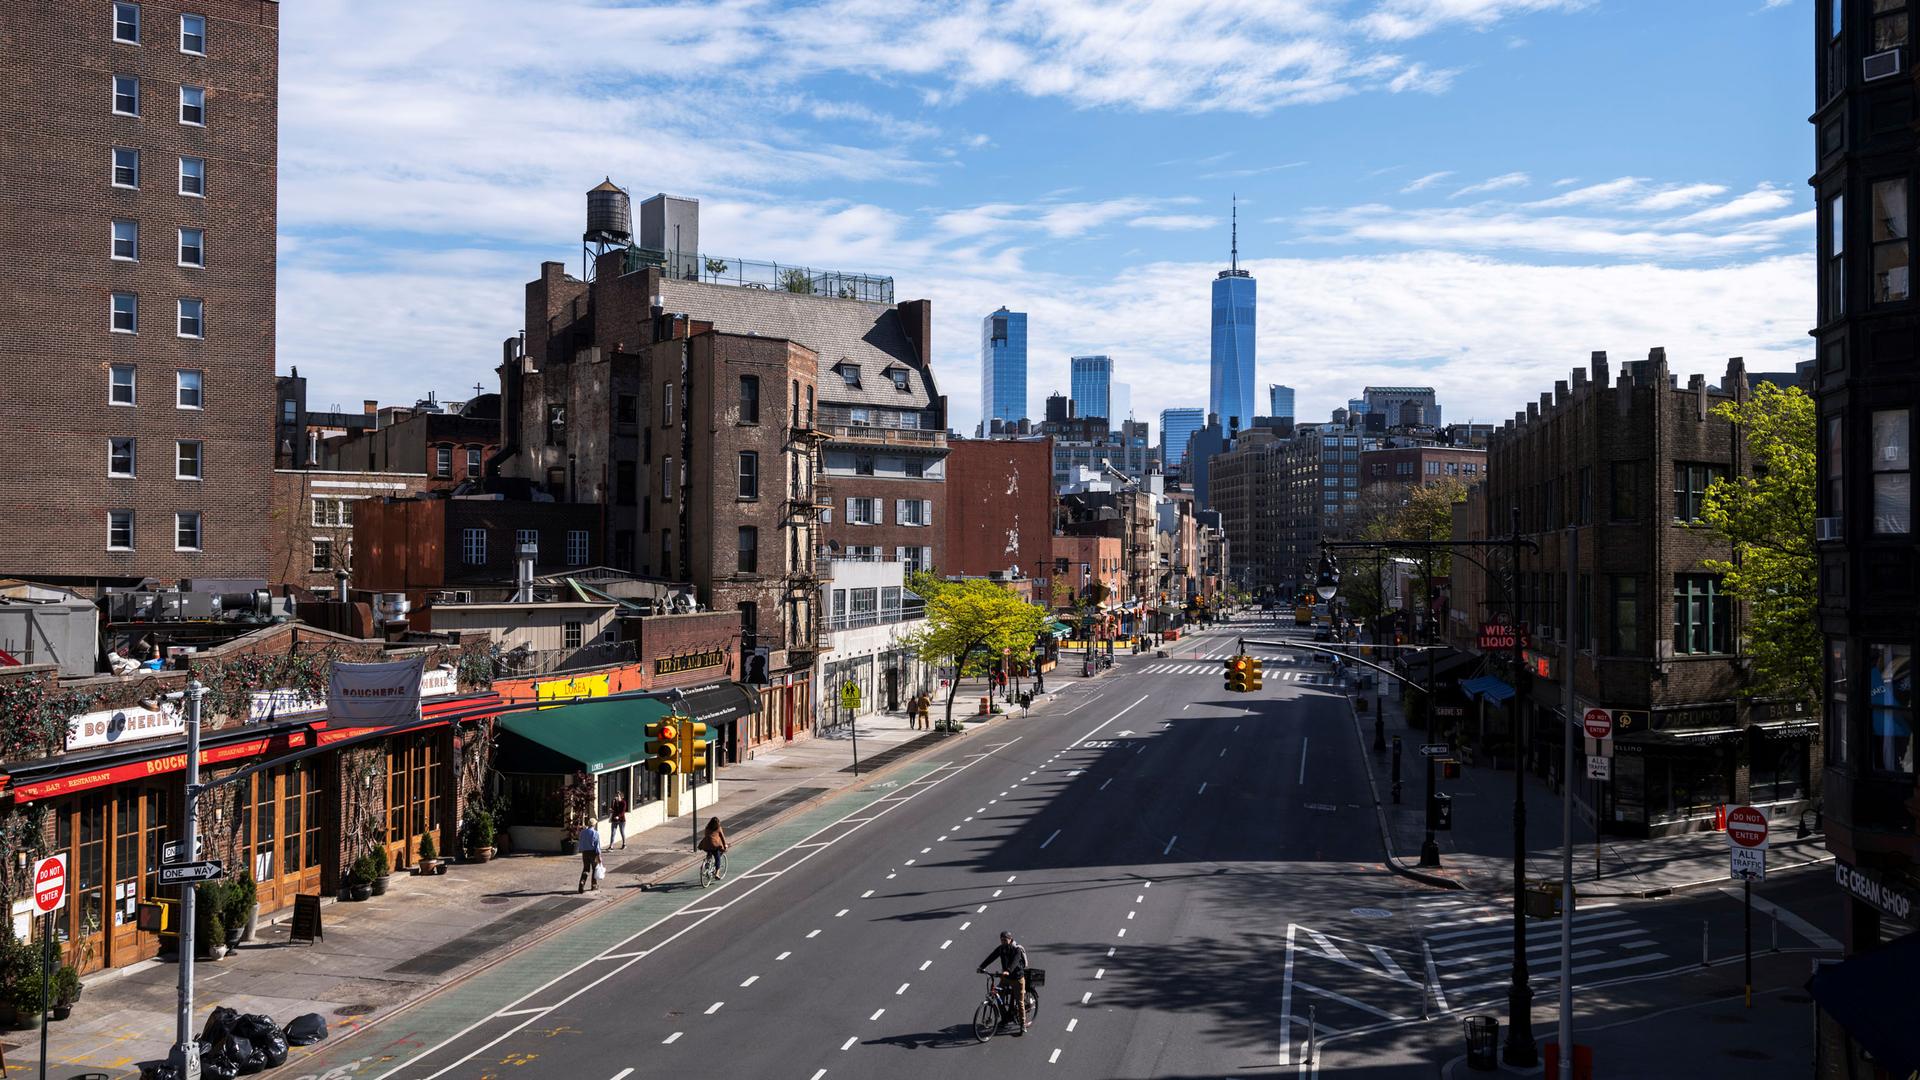 A cyclist is shown rides up a nearly empty three lanes of 7th Avenue with the Freedom Tower in the distance.